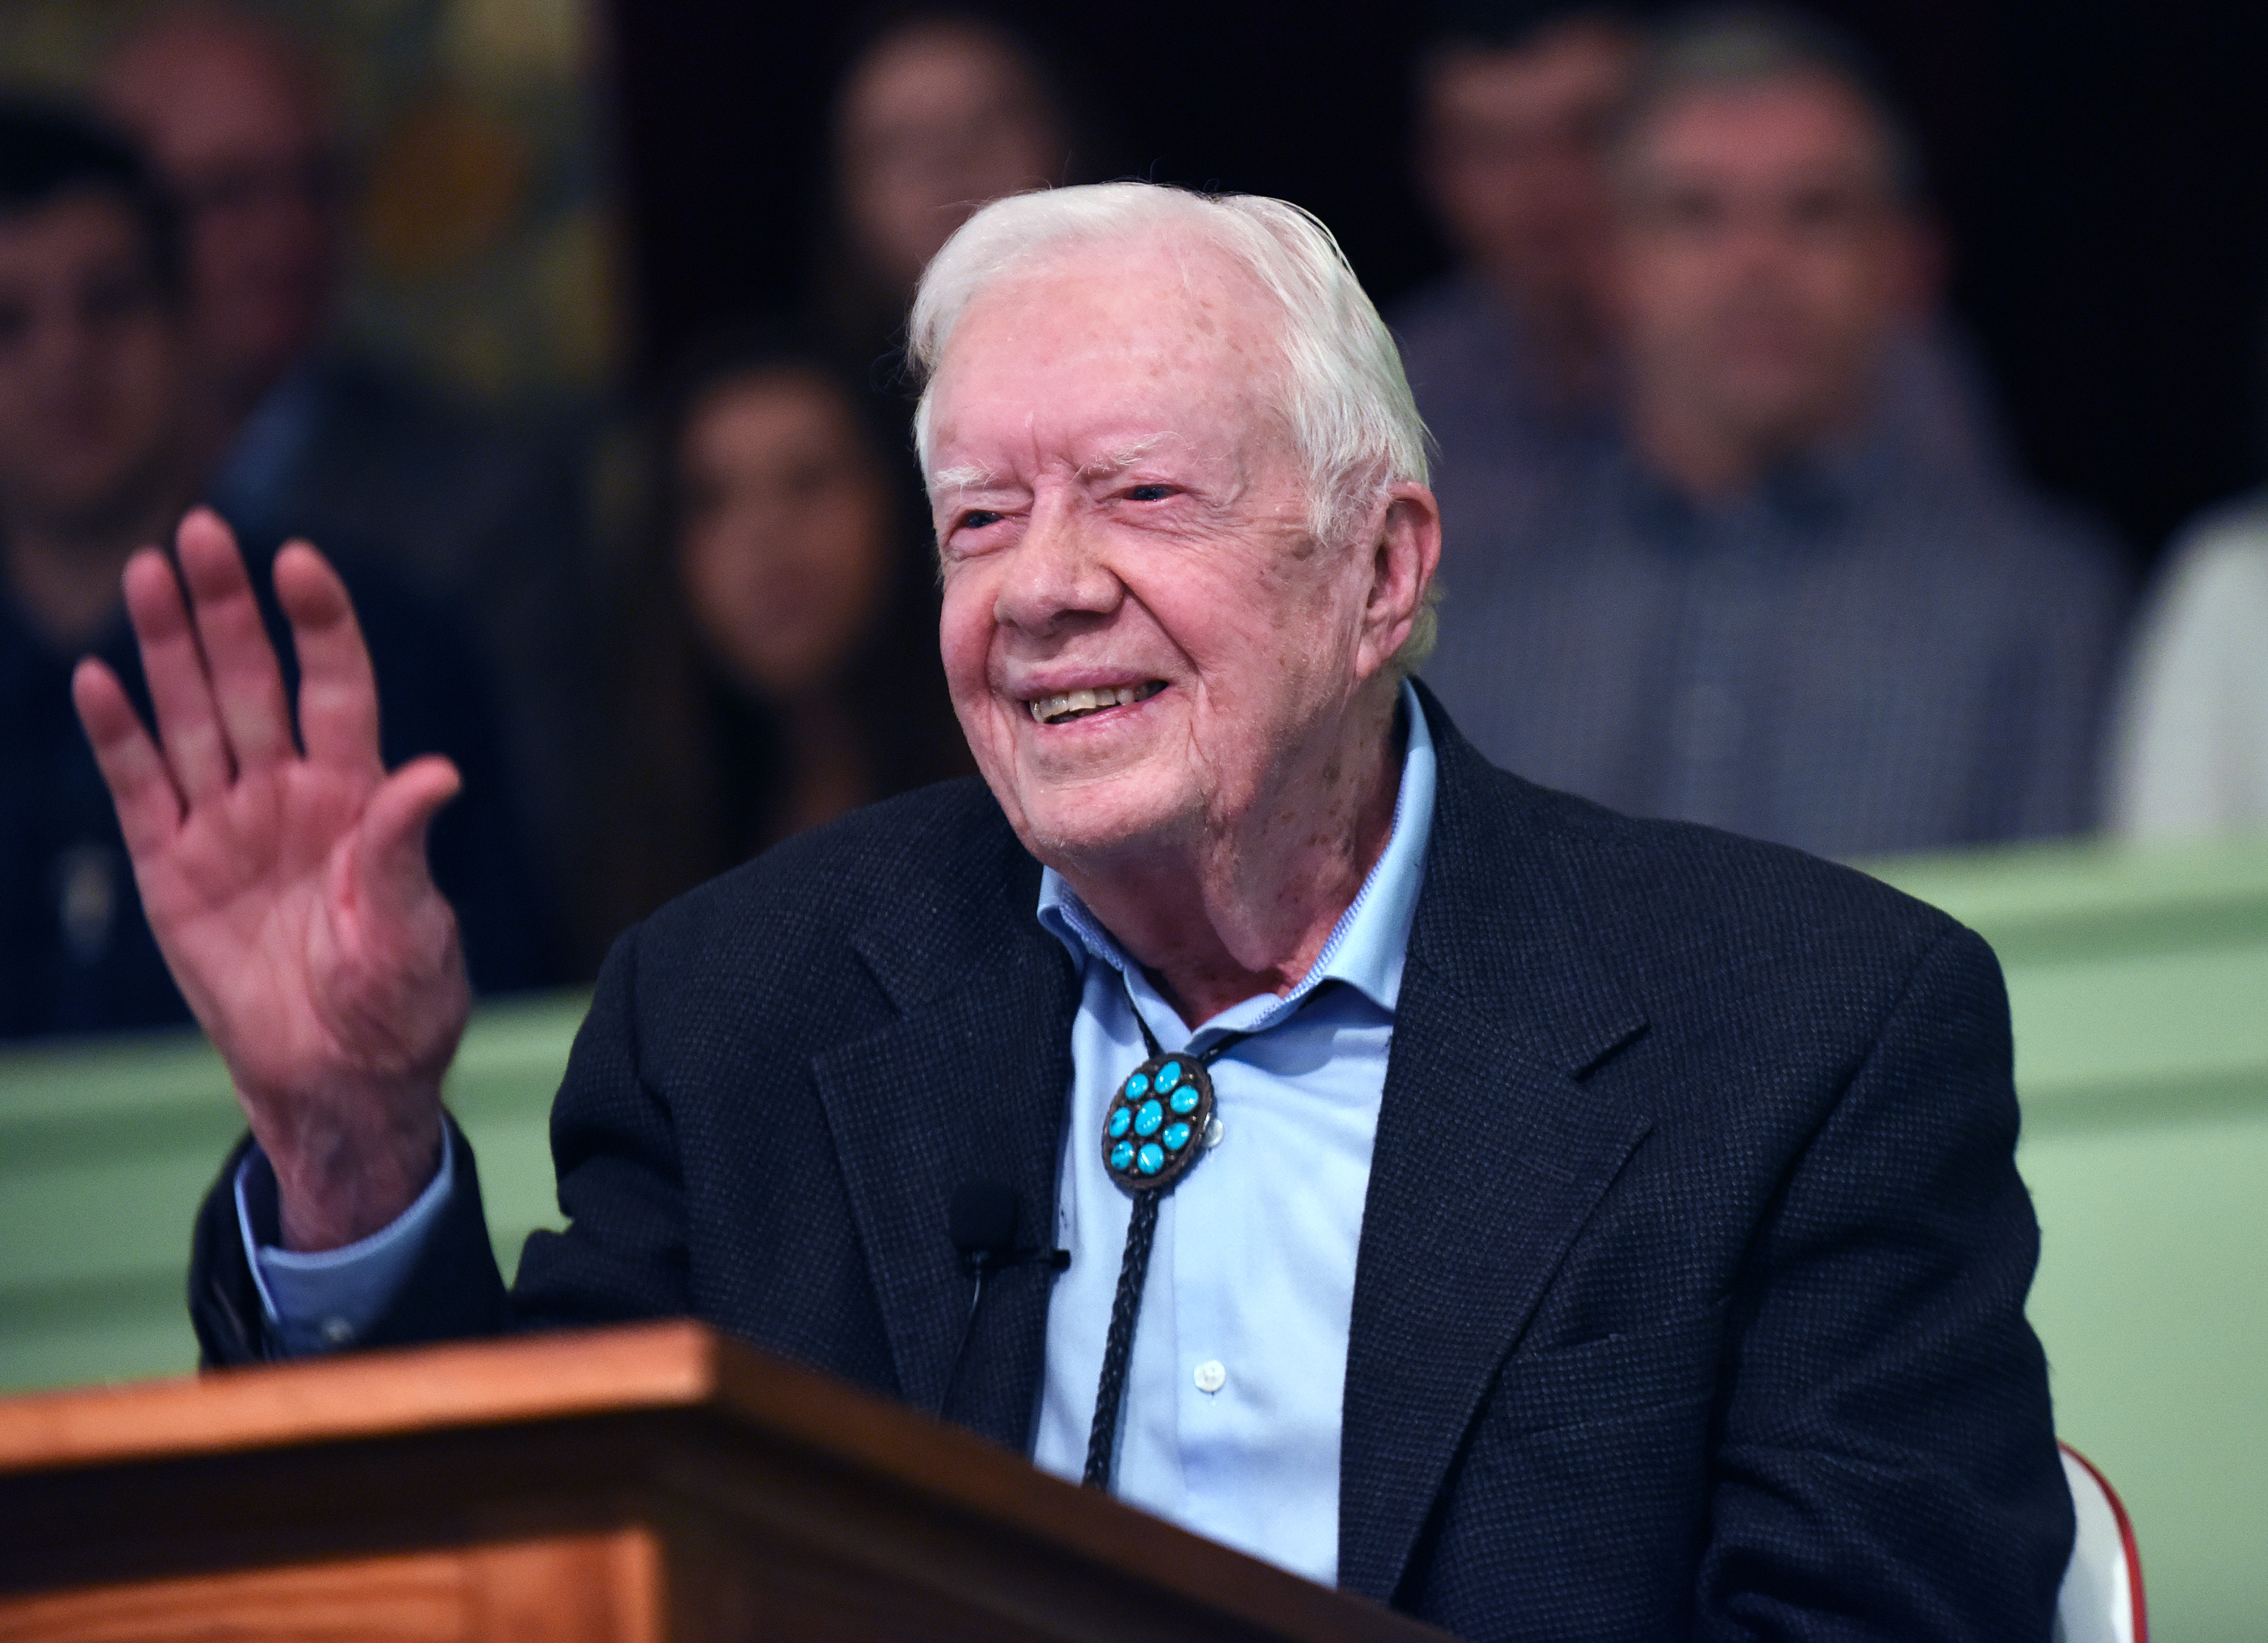 Jimmy Carter waves to the congregation after teaching Sunday school at Maranatha Baptist Church in his hometown of Plains, Georgia on April 28, 2019. | Source: Getty Images